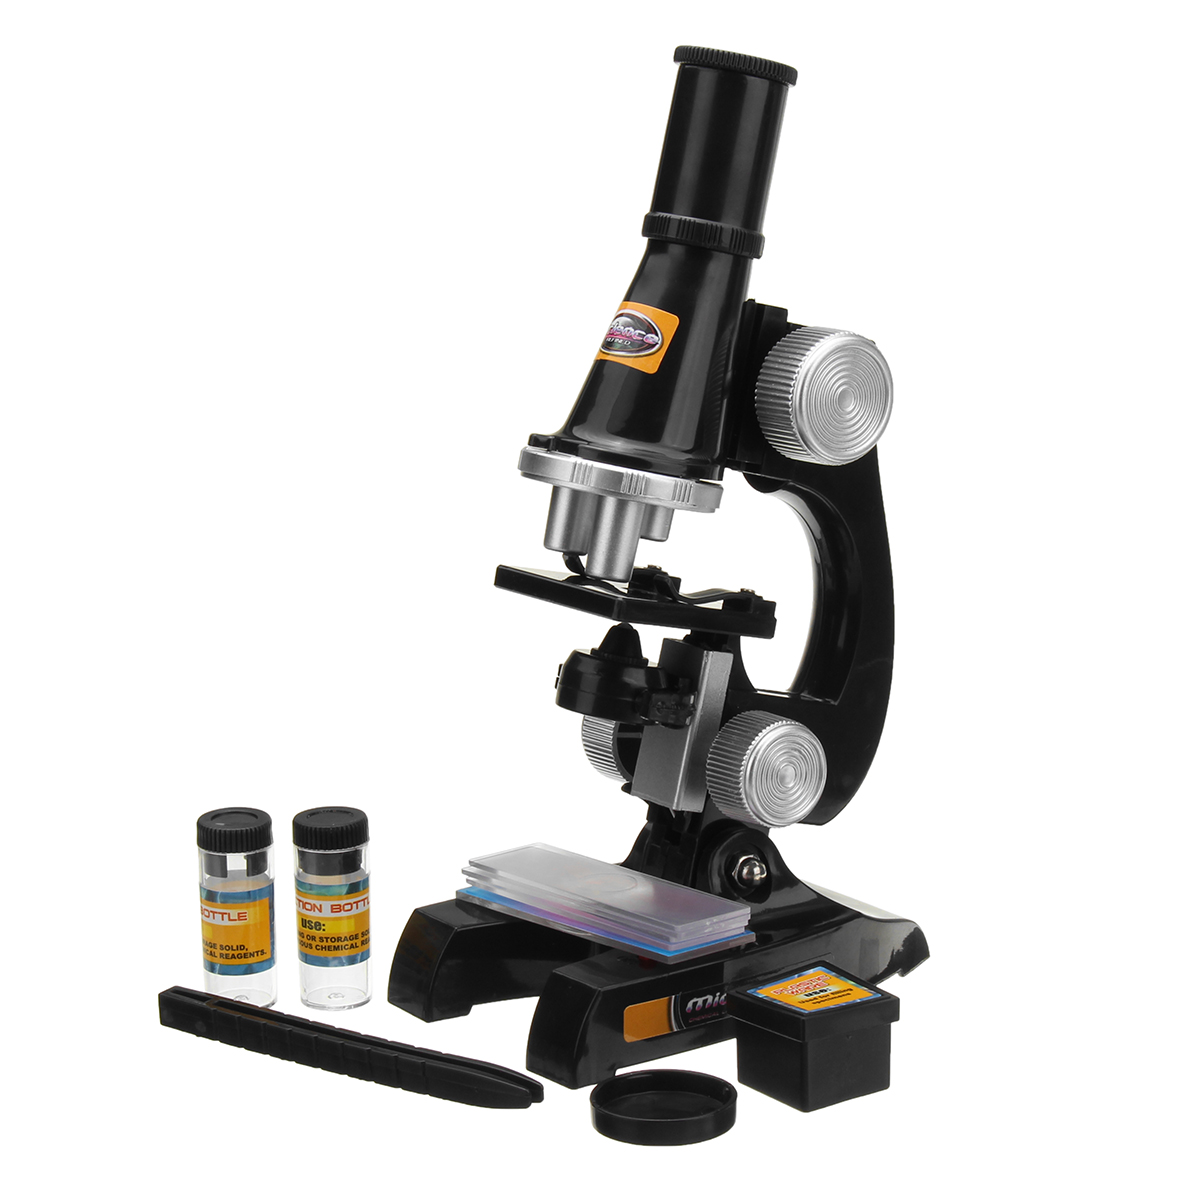 Childrens-Kids-Junior-Microscope-Science-Lab-Set-with-Light-Educational-Toy-1626068-9